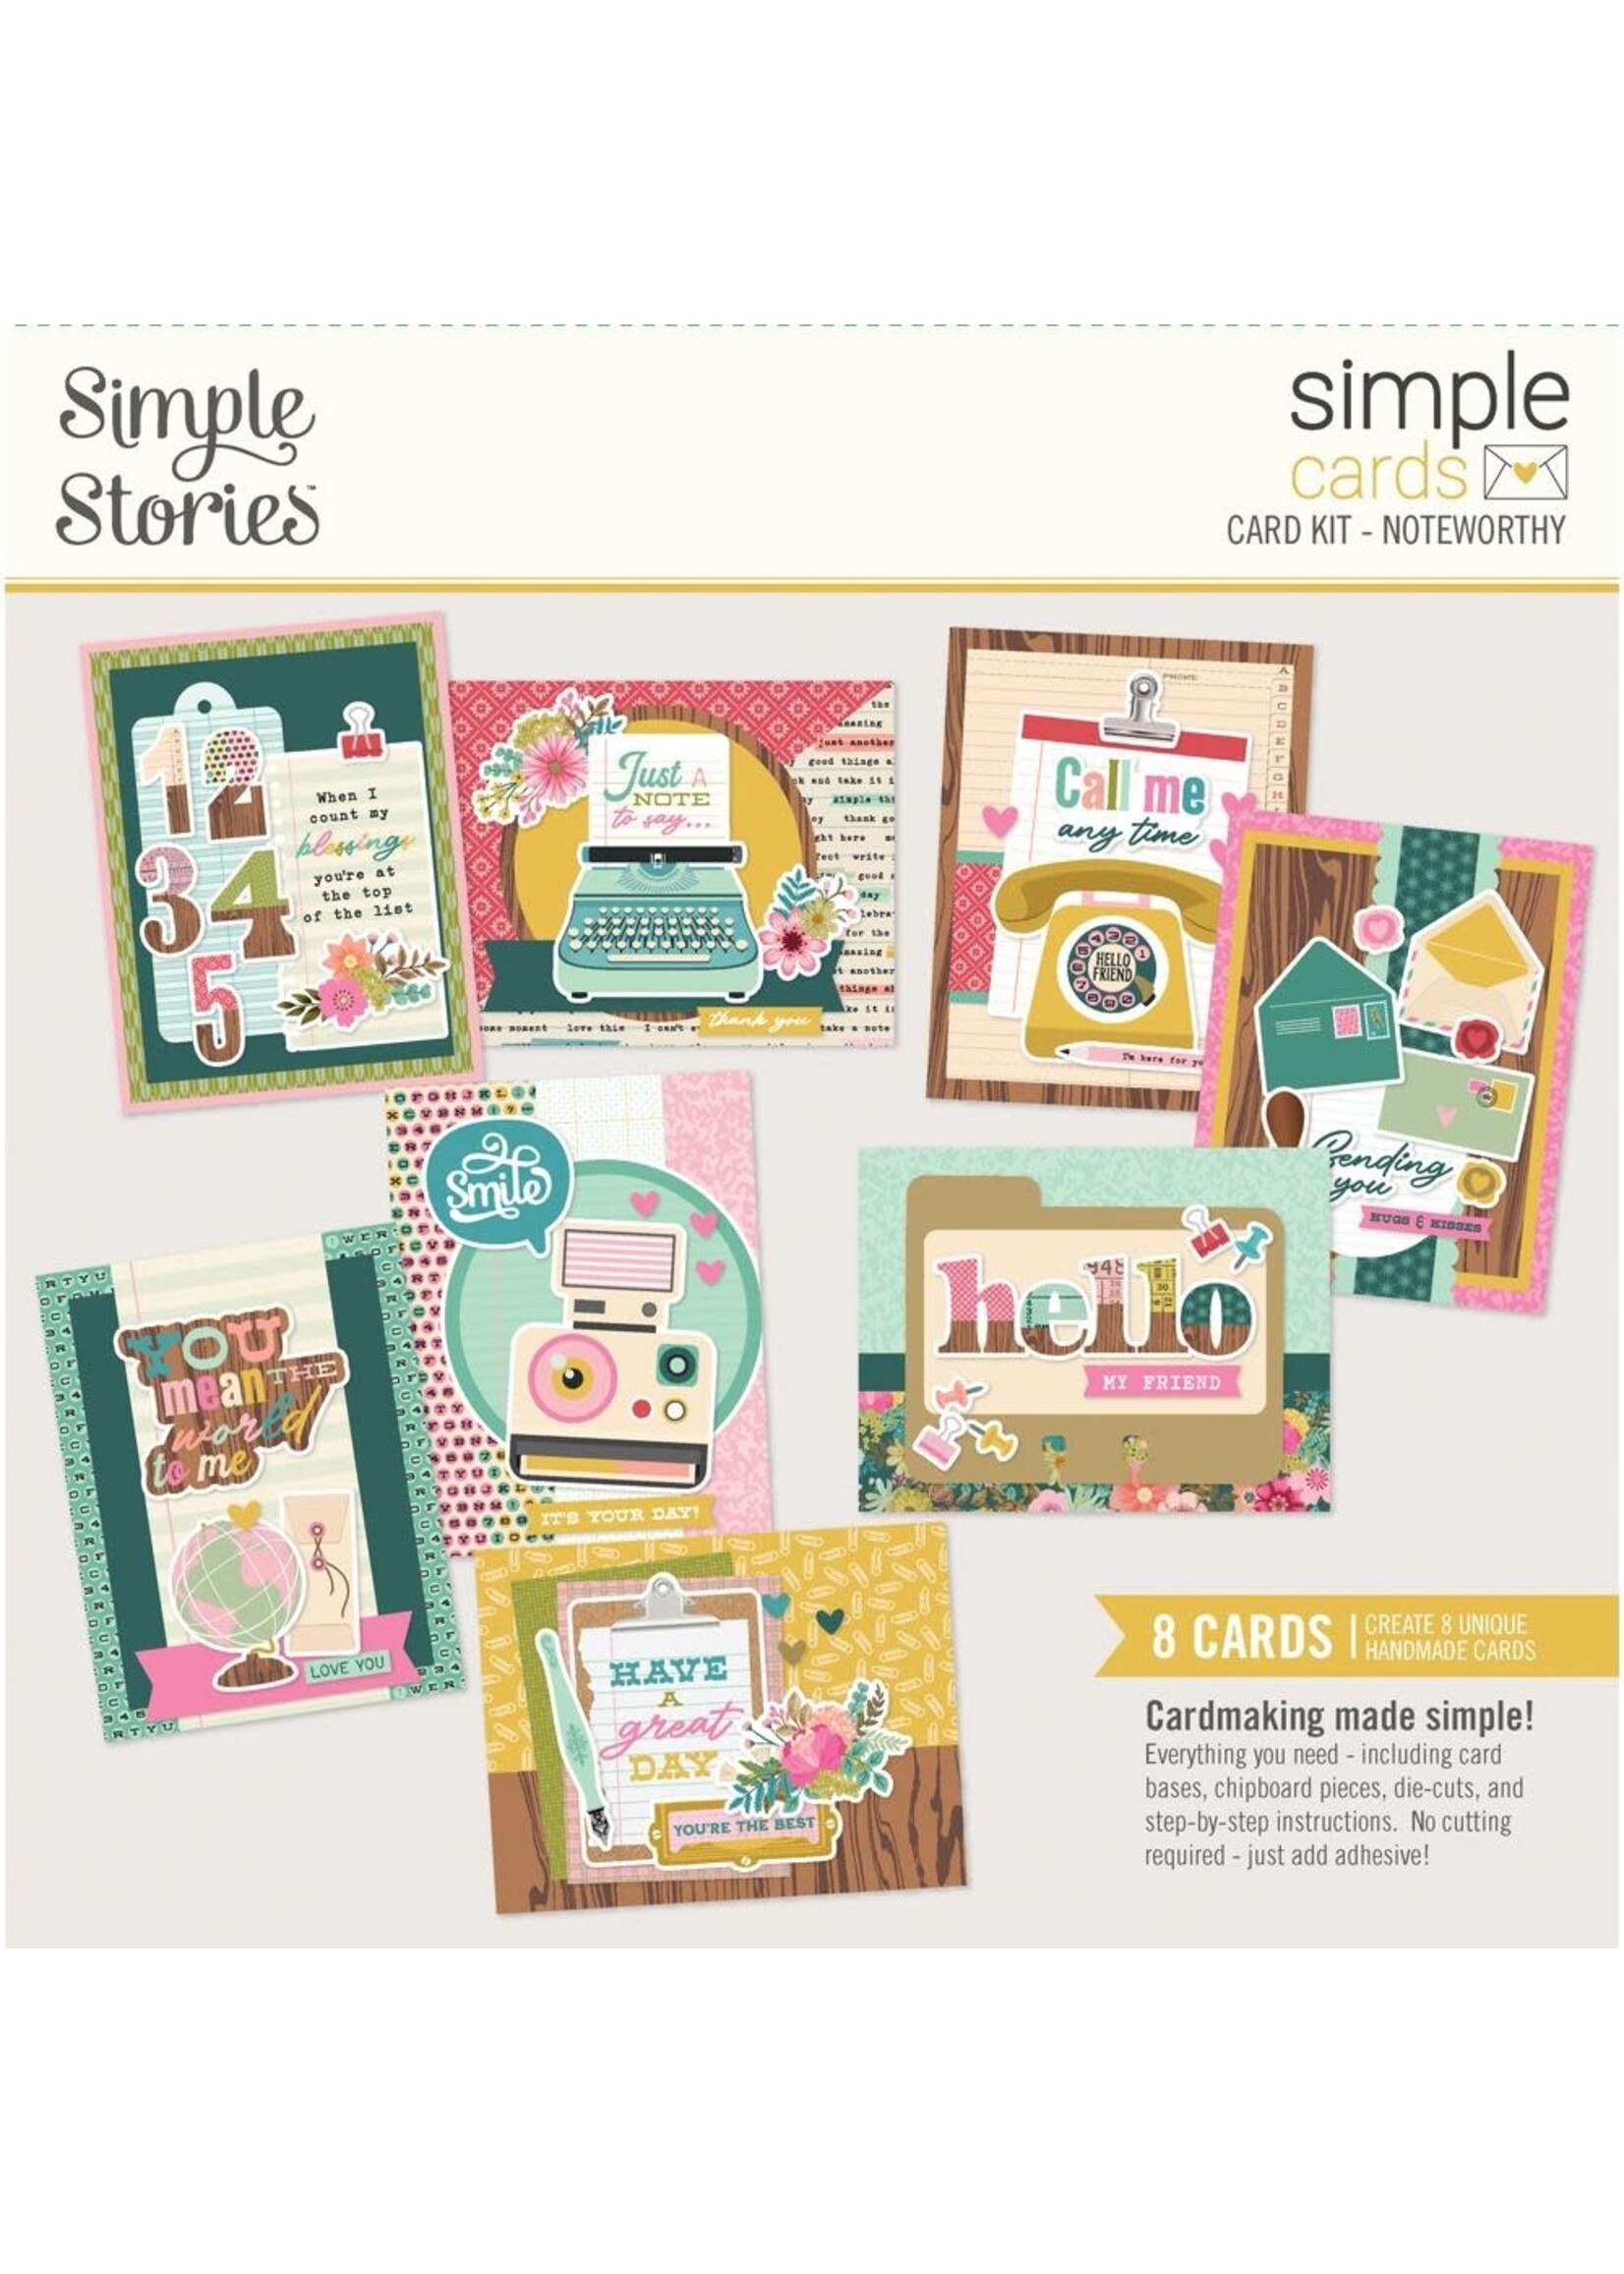 SIMPLE STORIES Noteworthy Card Kit